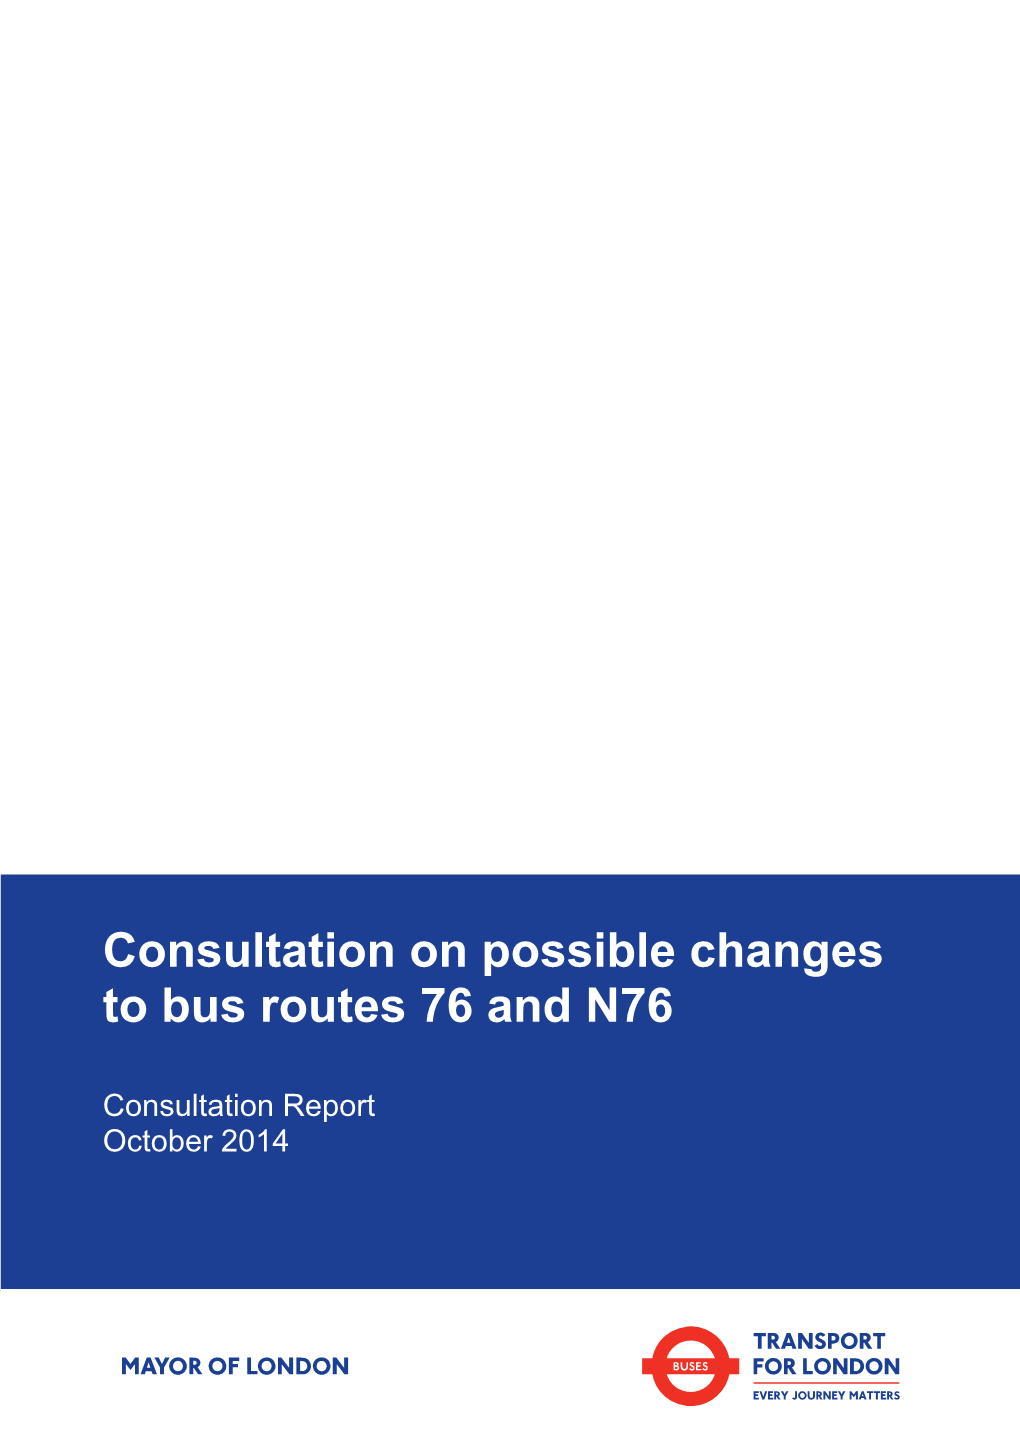 Consultation on Possible Changes to Bus Routes 76 and N76